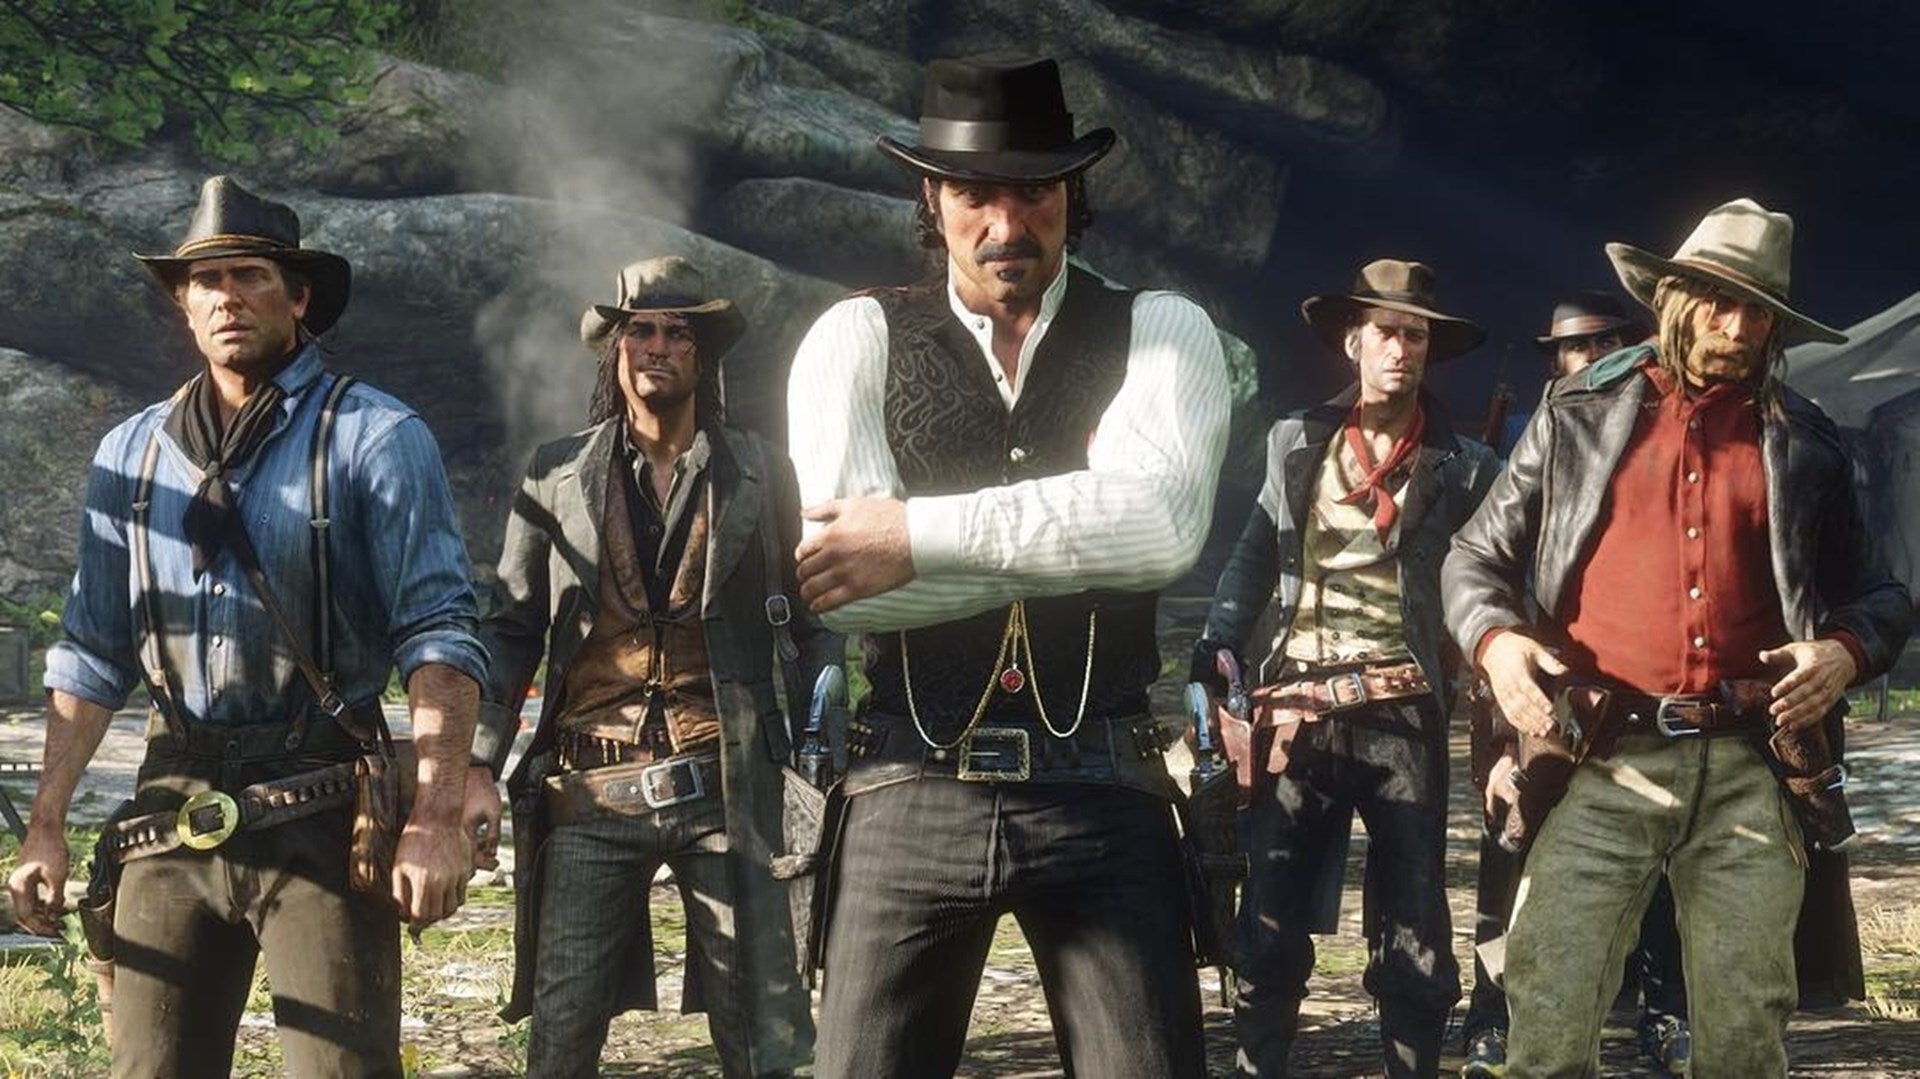 Være Skinne Displacement Red Dead Redemption 2 characters Susan Grimshaw, Molly O'Shea, Micah Bell,  others teased | VG247